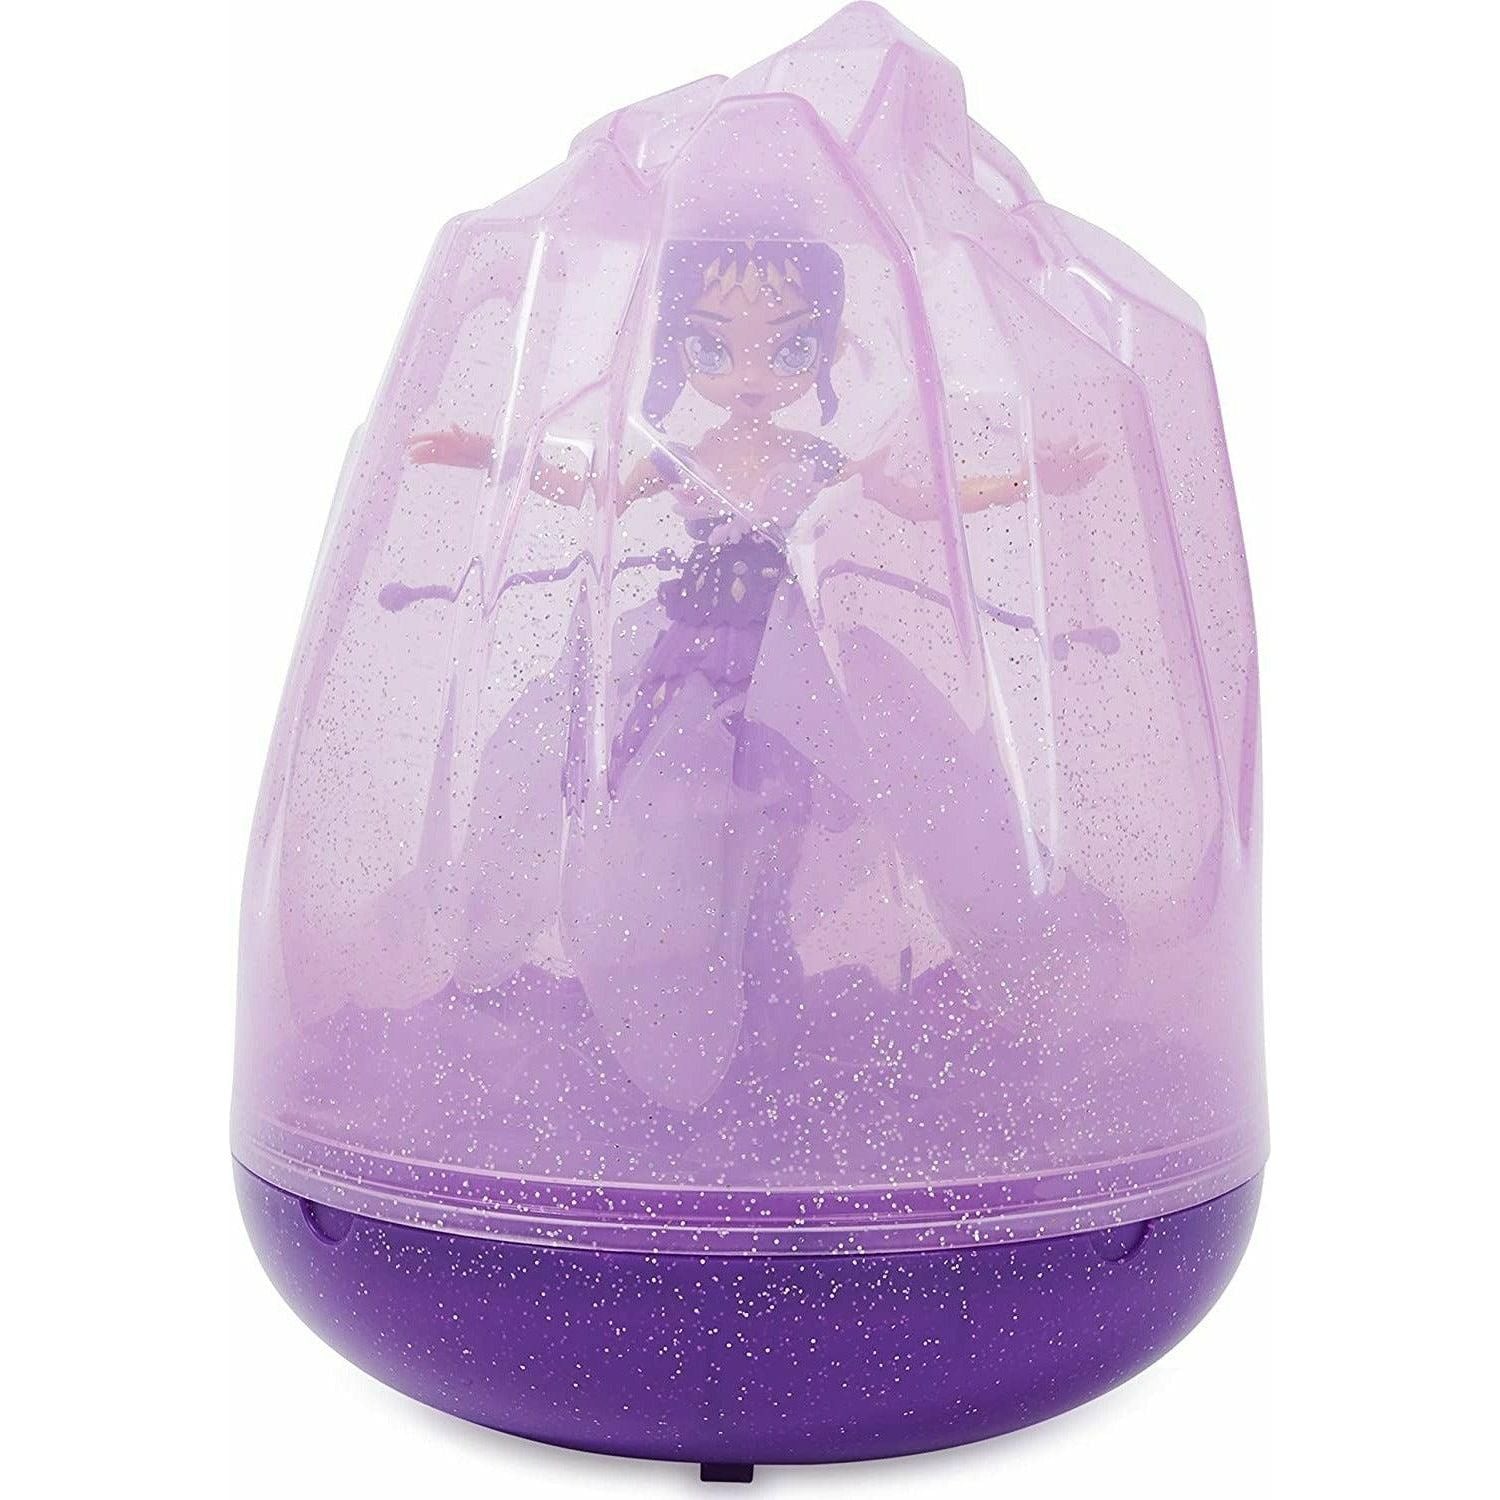 Hatchimals Pixies, Crystal Flyers Purple Magical Flying Pixie Toy - BumbleToys - 6+ Years, Girls, Miniature Dolls & Accessories, OXE, Pre-Order